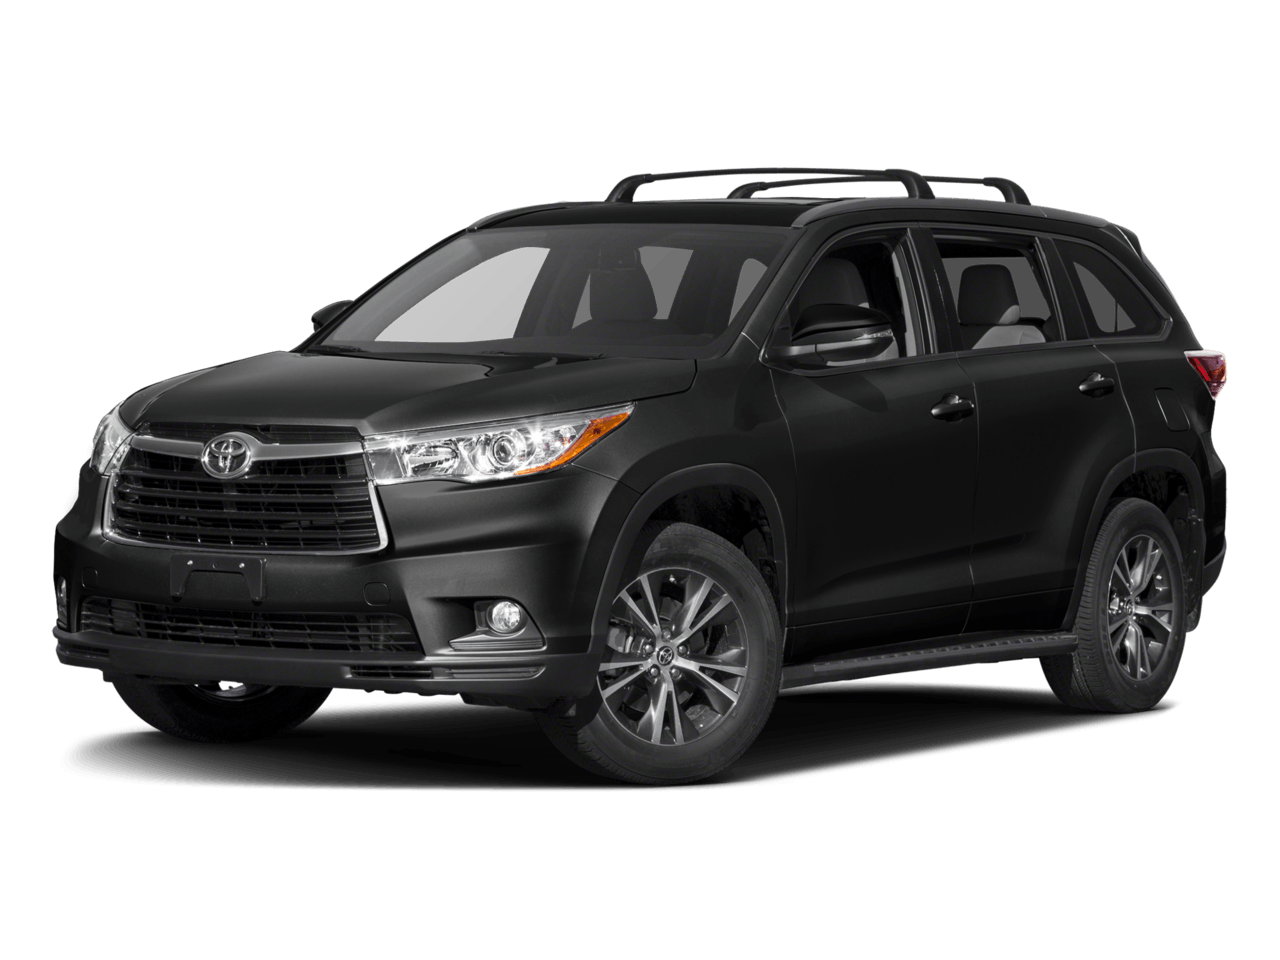 Used 2016 Toyota Highlander XLE with VIN 5TDJKRFH6GS245005 for sale in Waite Park, Minnesota